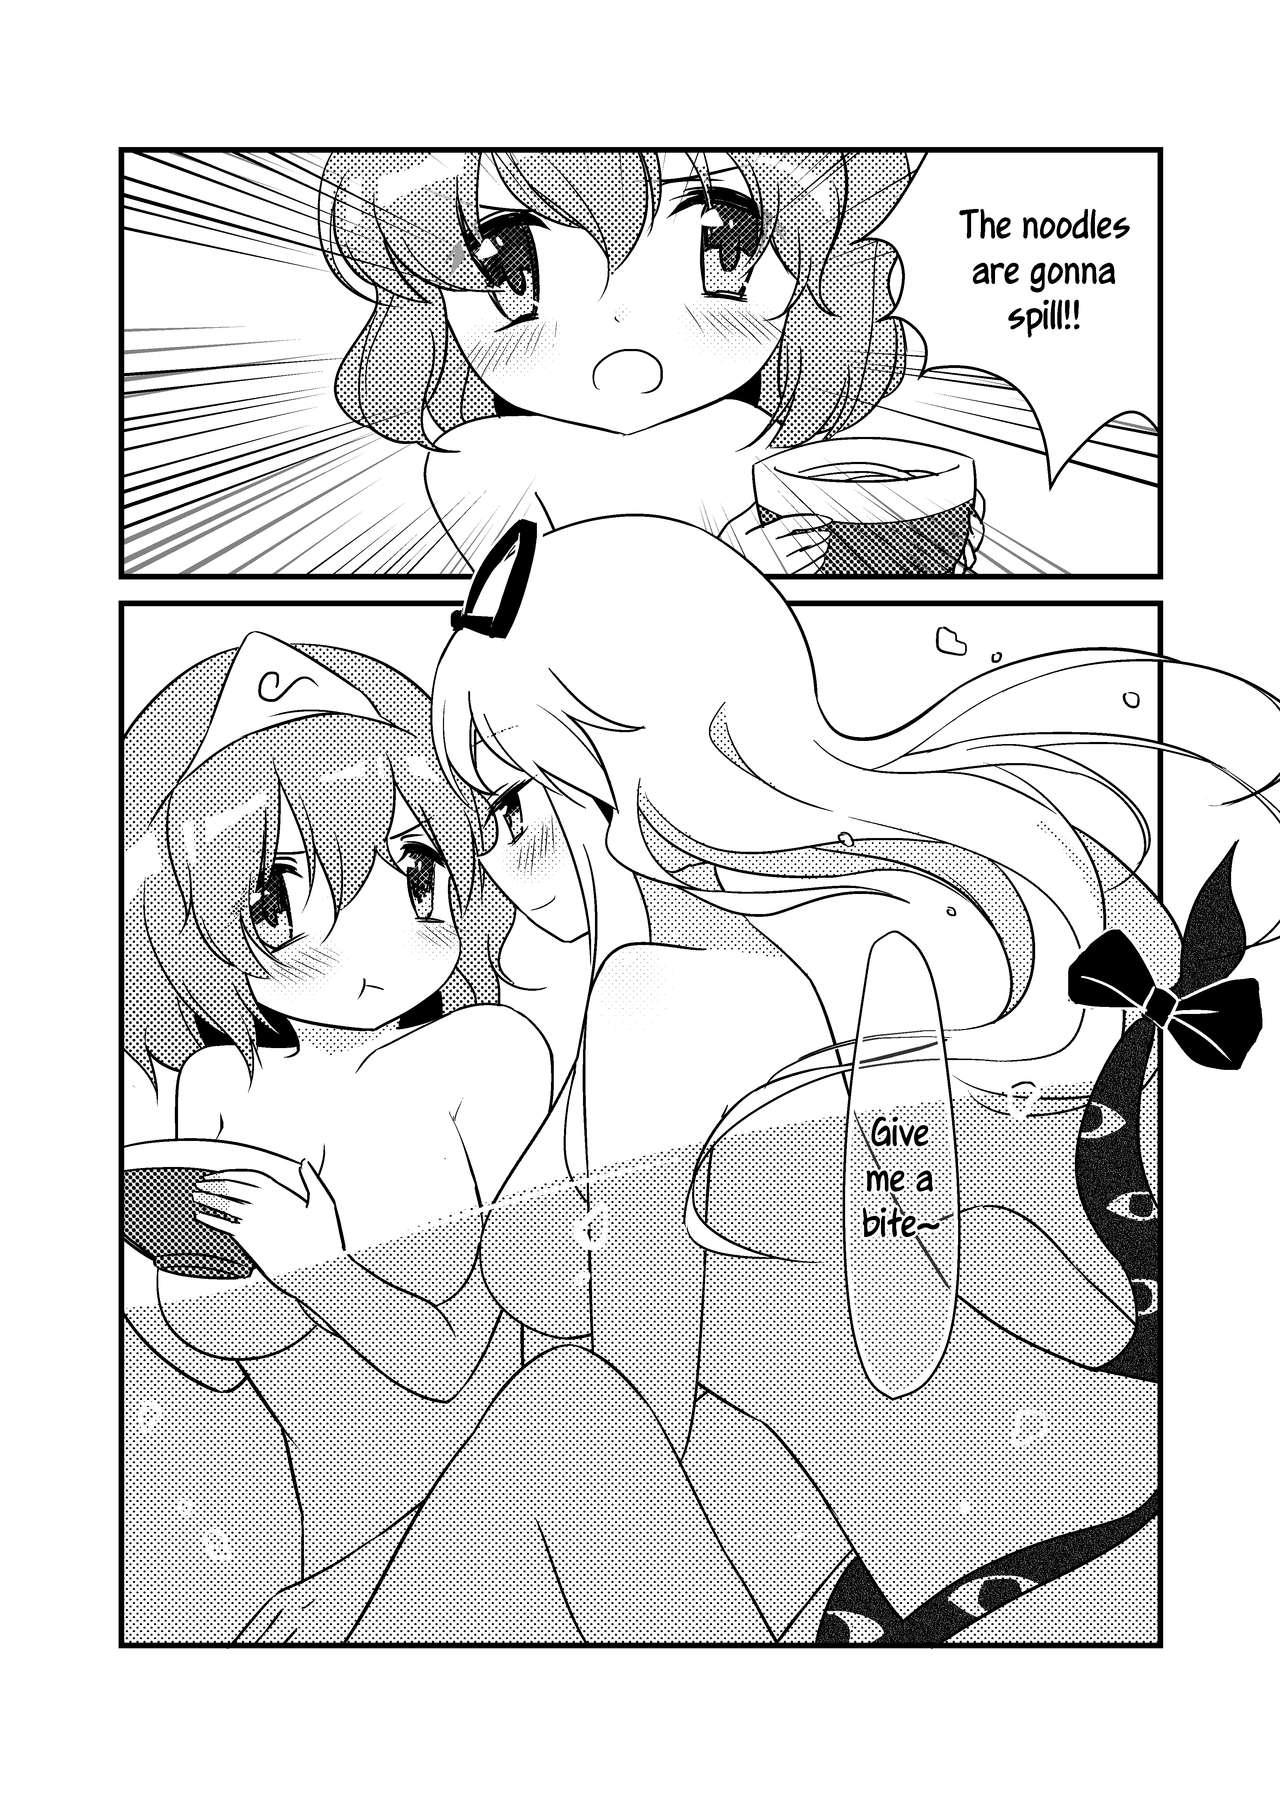 Teenager ????一起泡温泉吧！ | ????Let's Soak in the Hot Spring! - Touhou project 8teen - Page 6